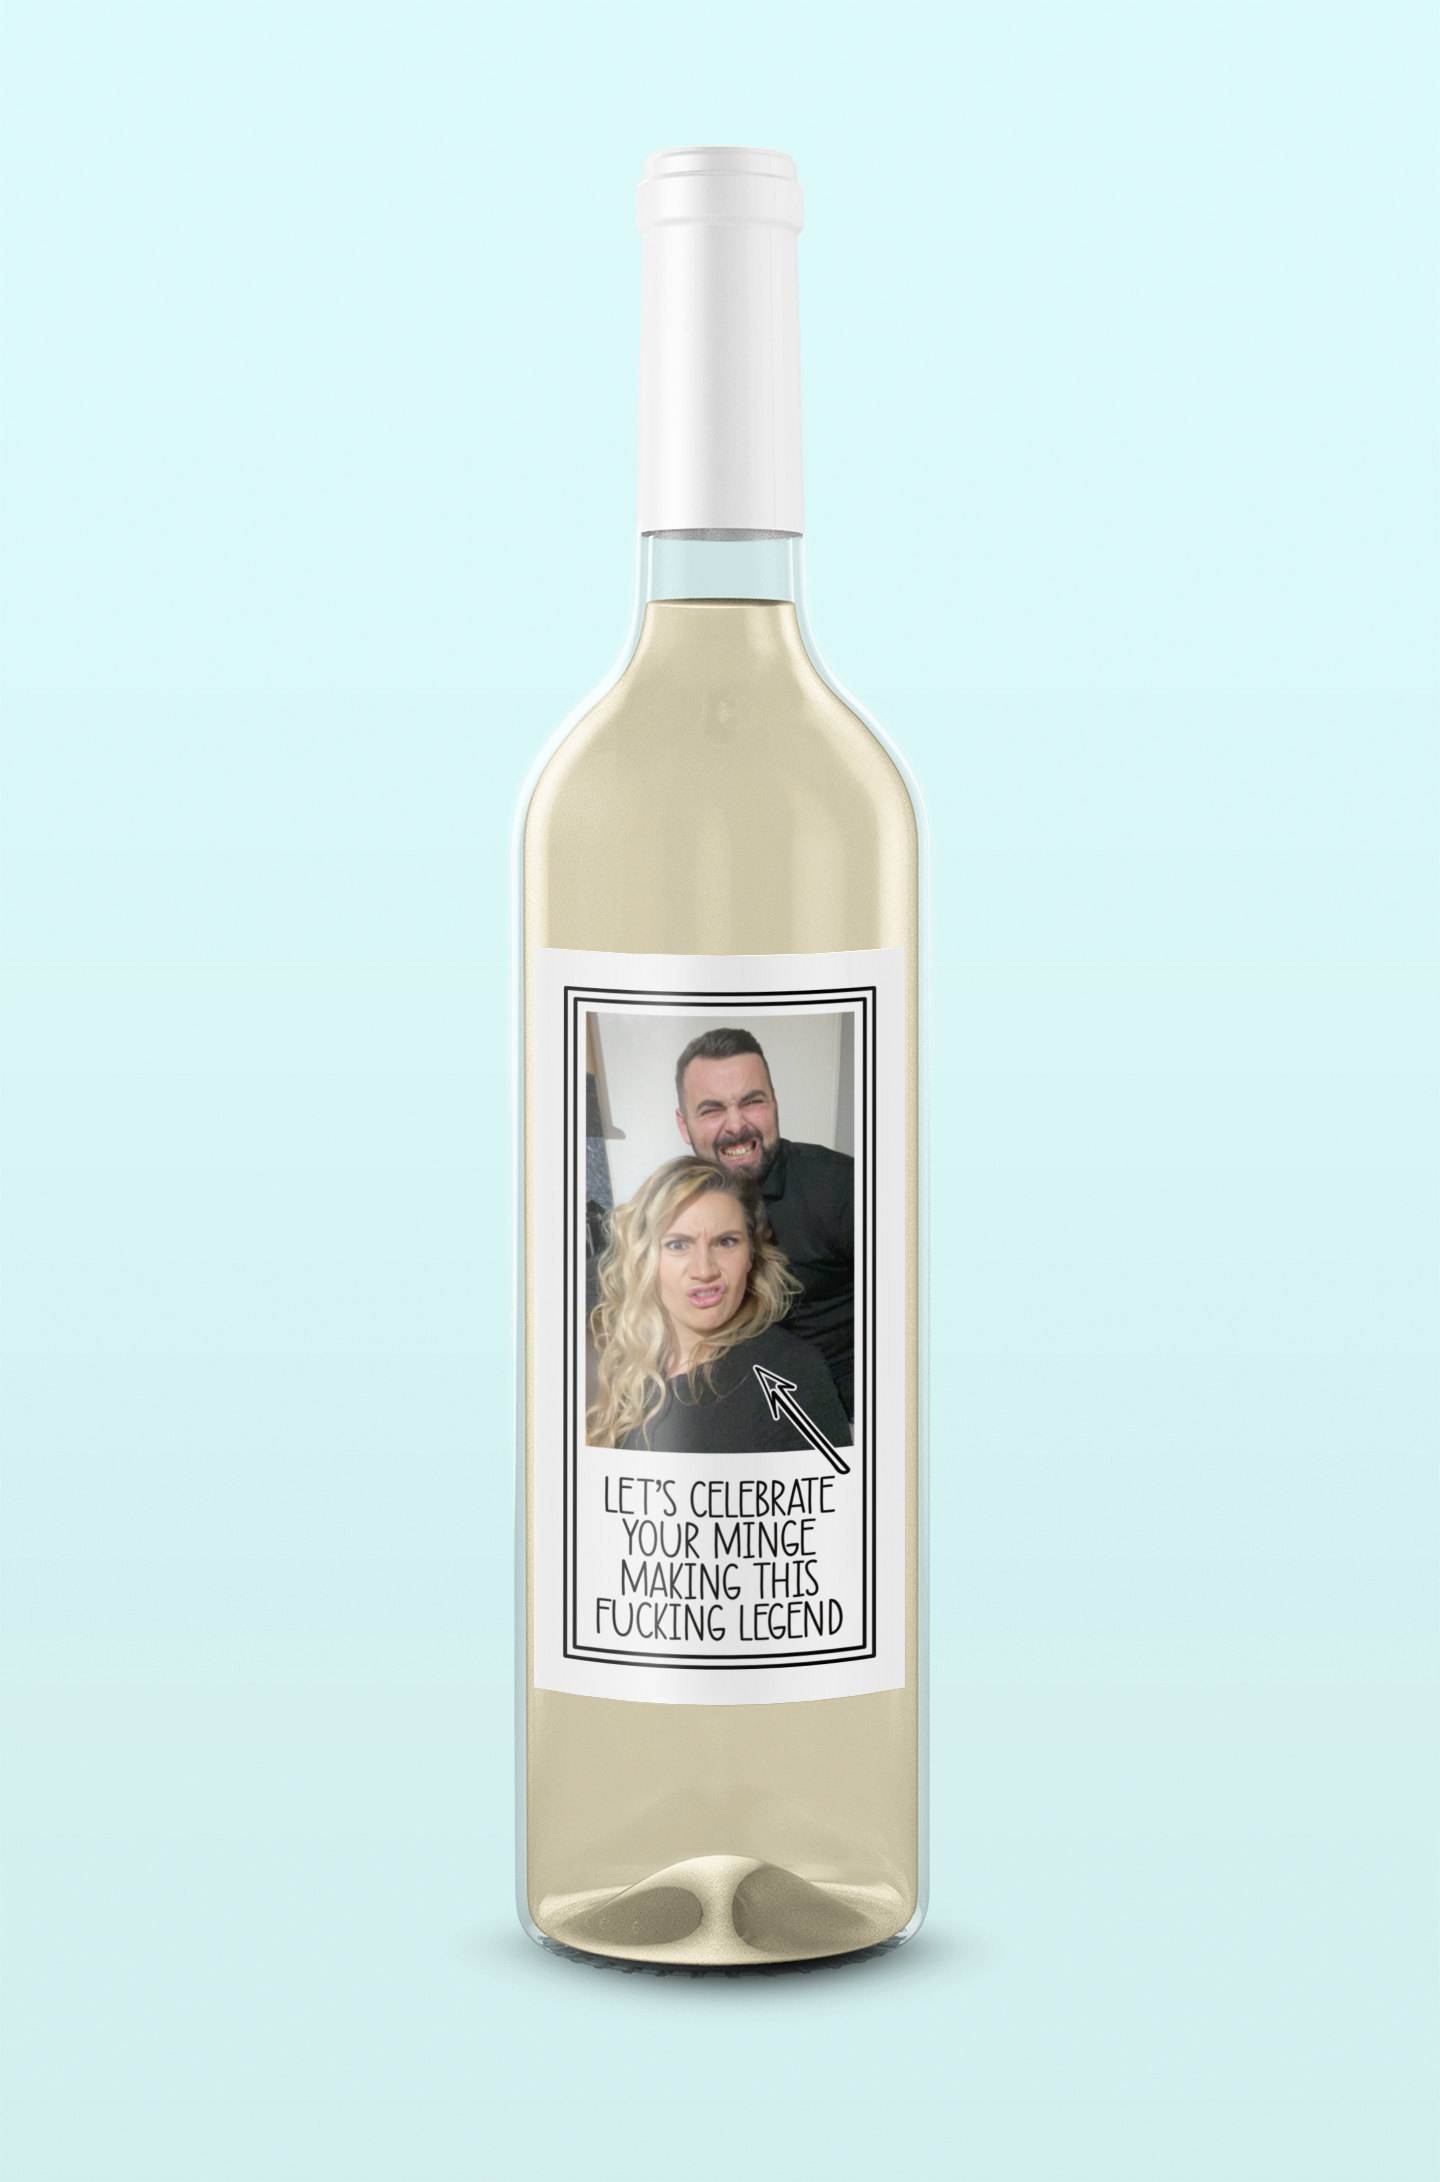 chrissy fawcett recommends fucking a wine bottle pic